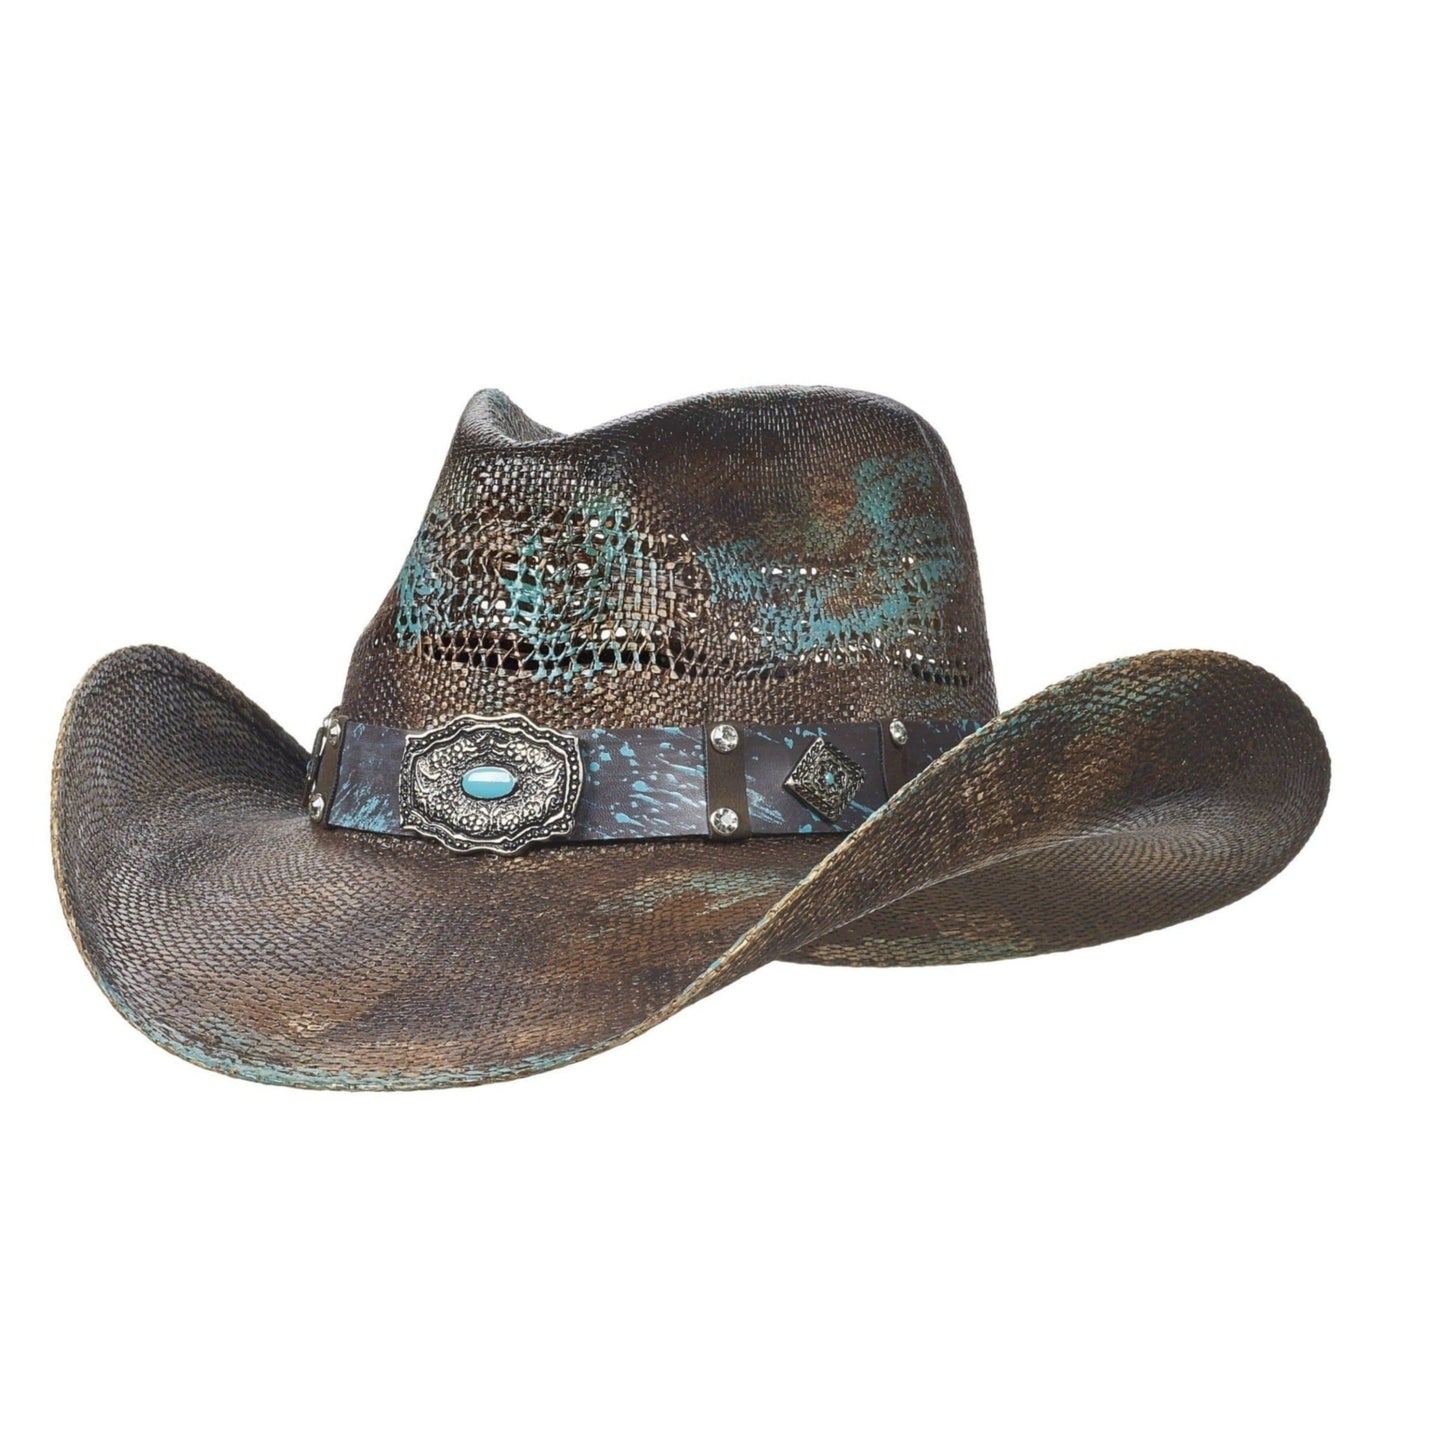 Bangora cowboy hat for girls with turquoise